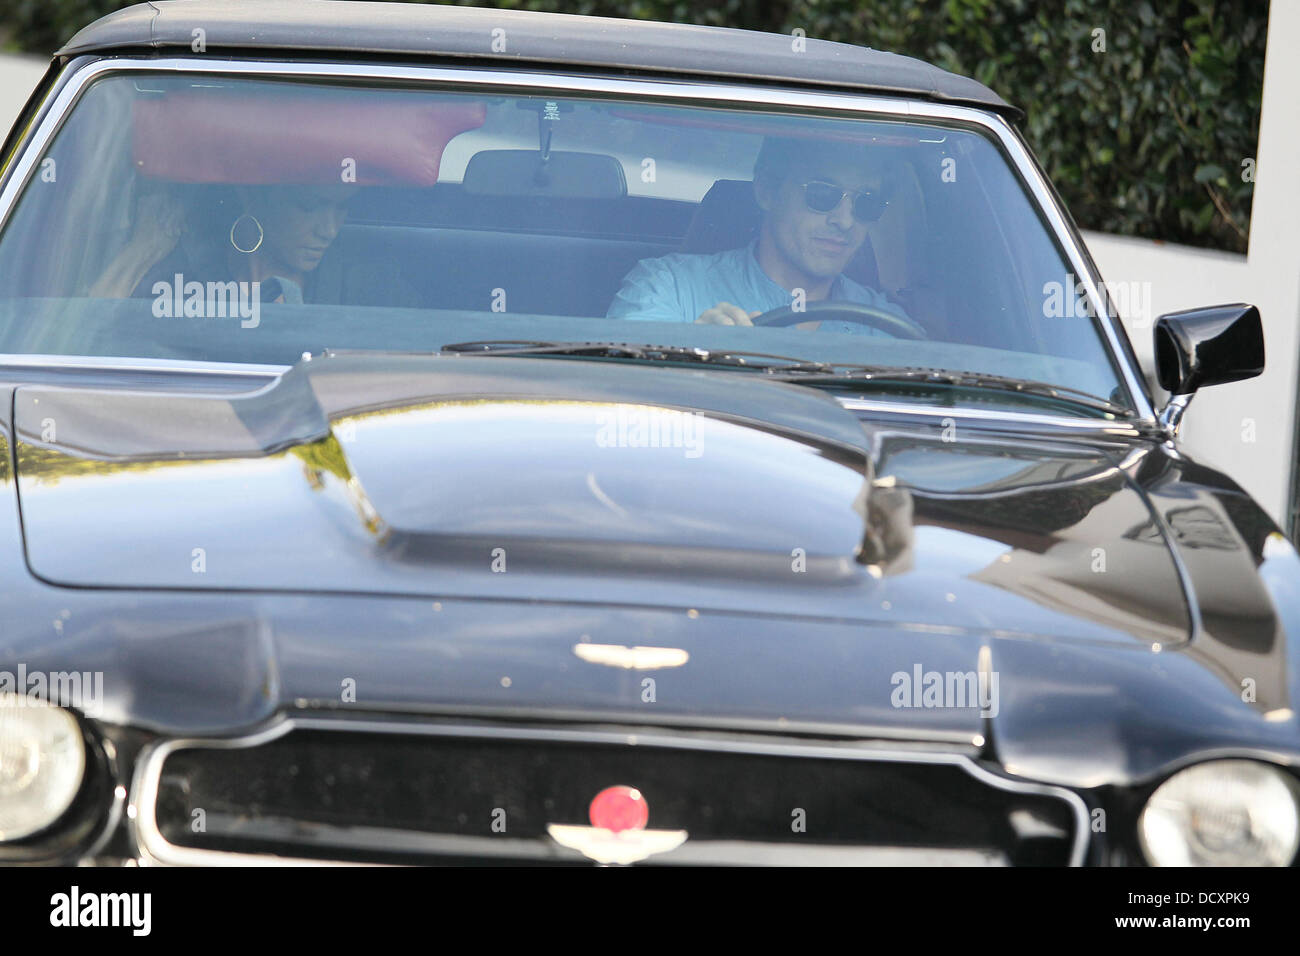 Halle Berry leaves with Olivier Martinez at the wheel of a black Aston Martin V8 Vantage Volante after having lunch at Ciecconi's in Beverly Hills Los Angeles, California - 29.12.11 Stock Photo